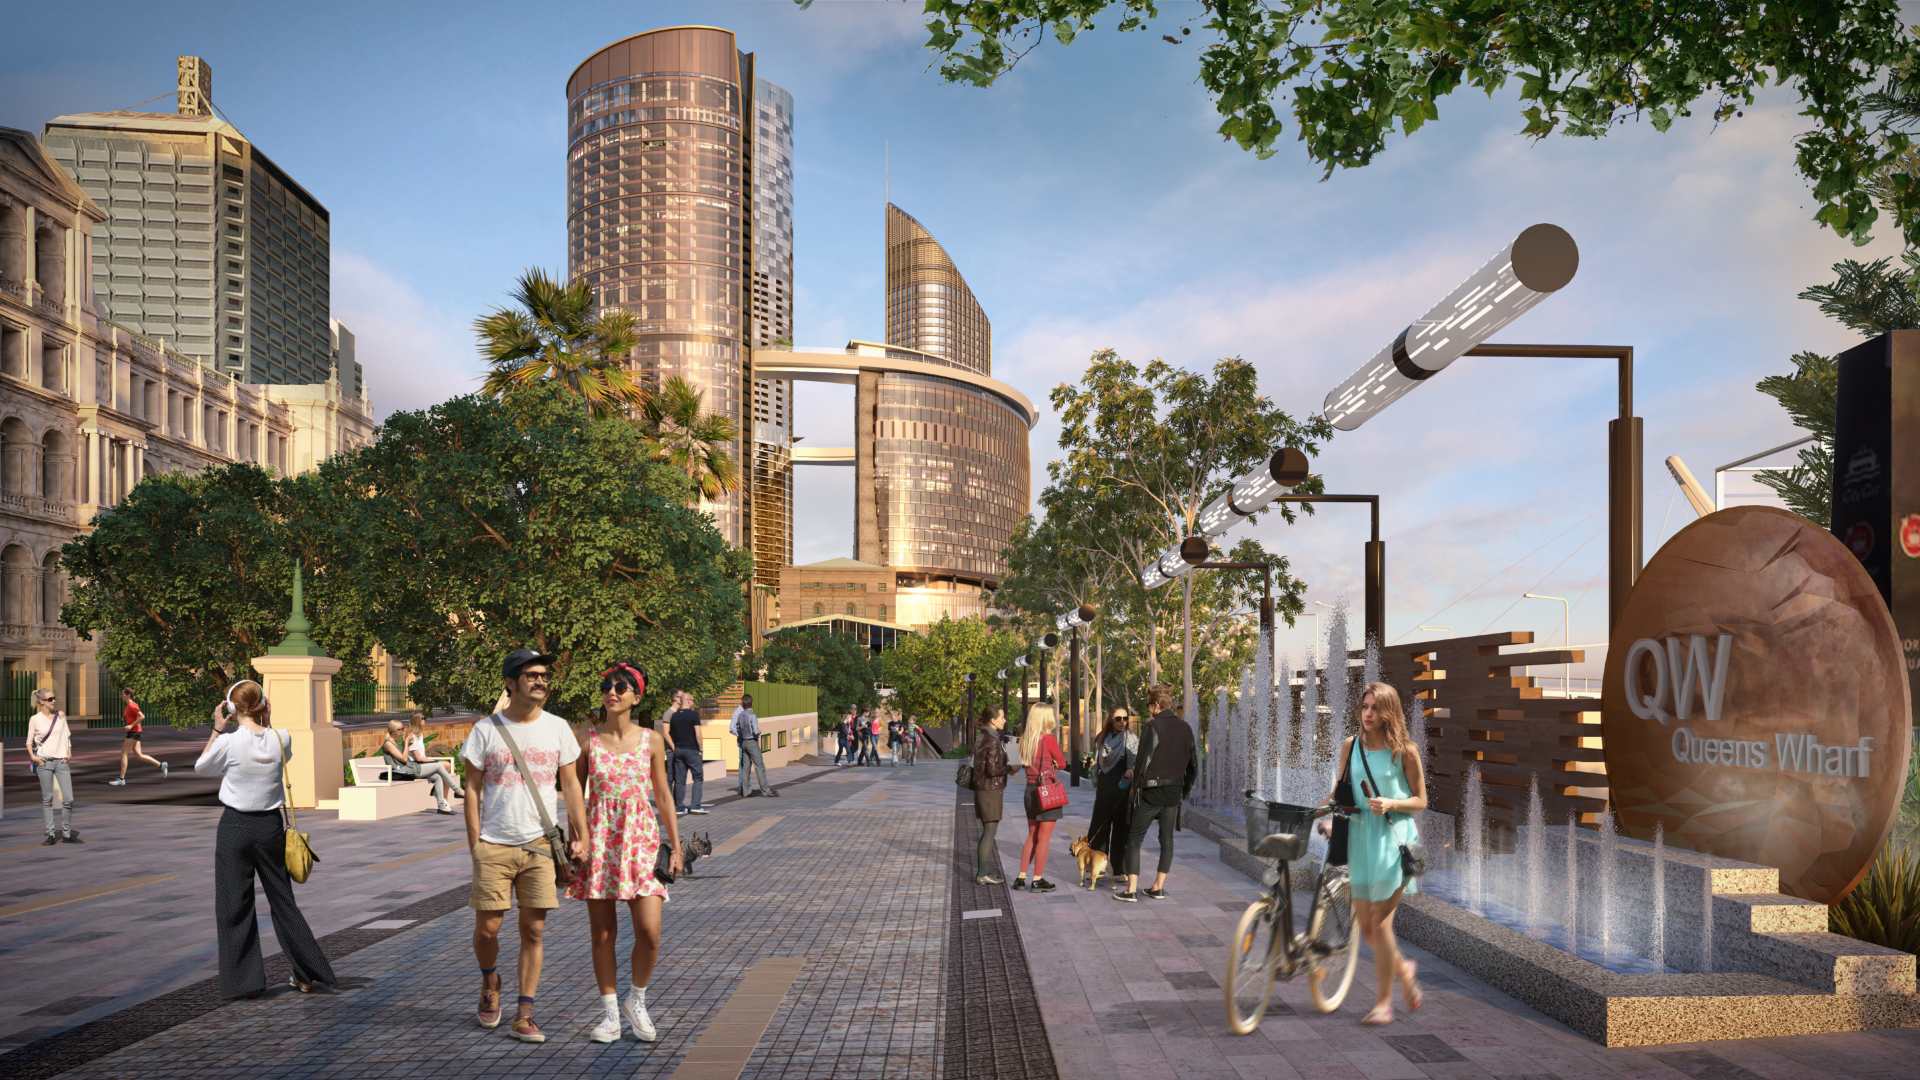 Brisbane Is Getting a 100-Metre-High Sky Deck with a Restaurant, Bar and Glass-Floor Viewing Platform